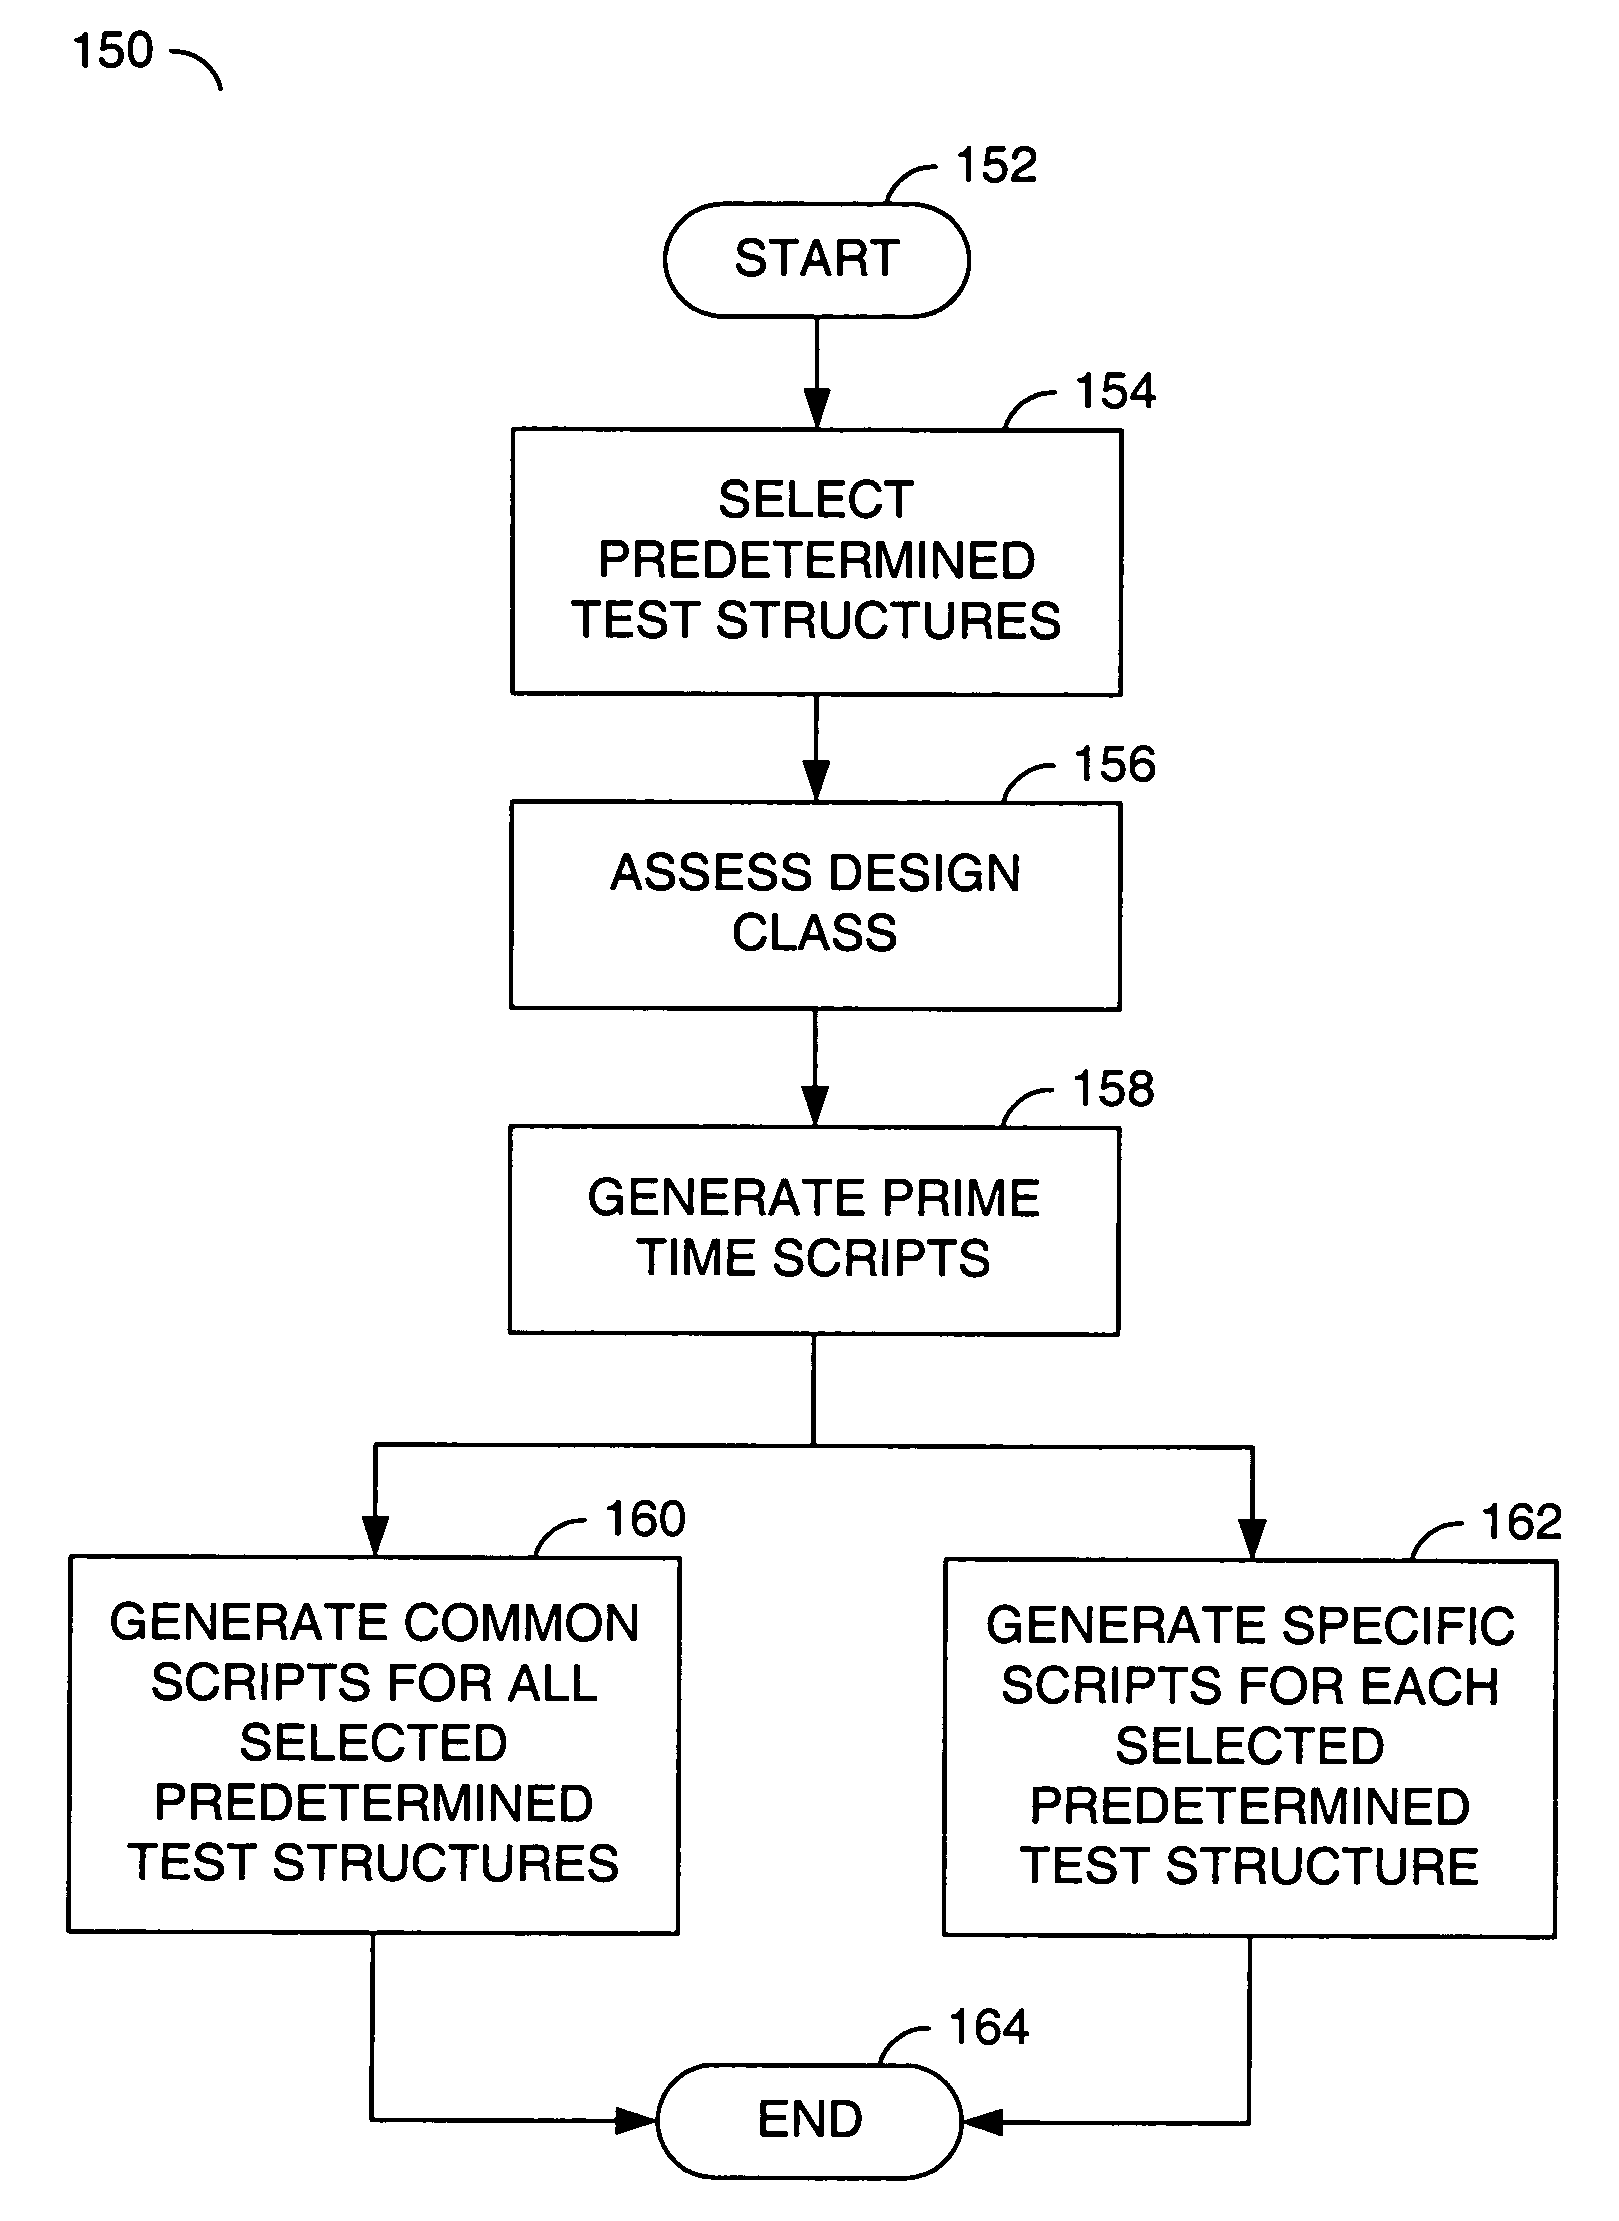 Automatic generating of timing constraints for the validation/signoff of test structures